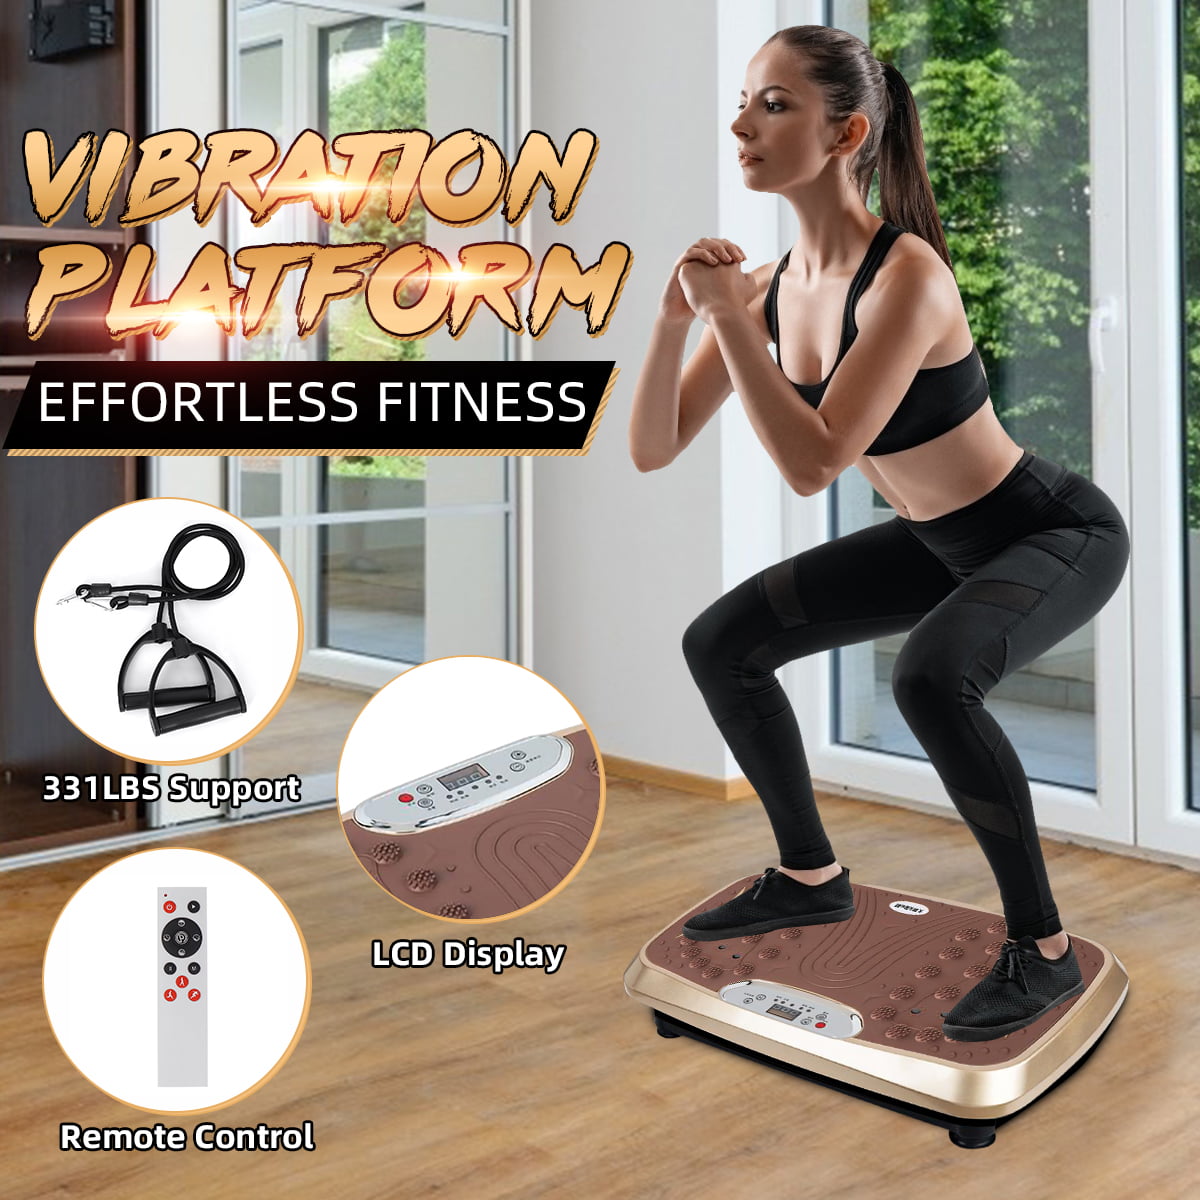 Details about   Whole Body Vibration Platform Plate Fitness Machine with Resistance Bands Gym US 